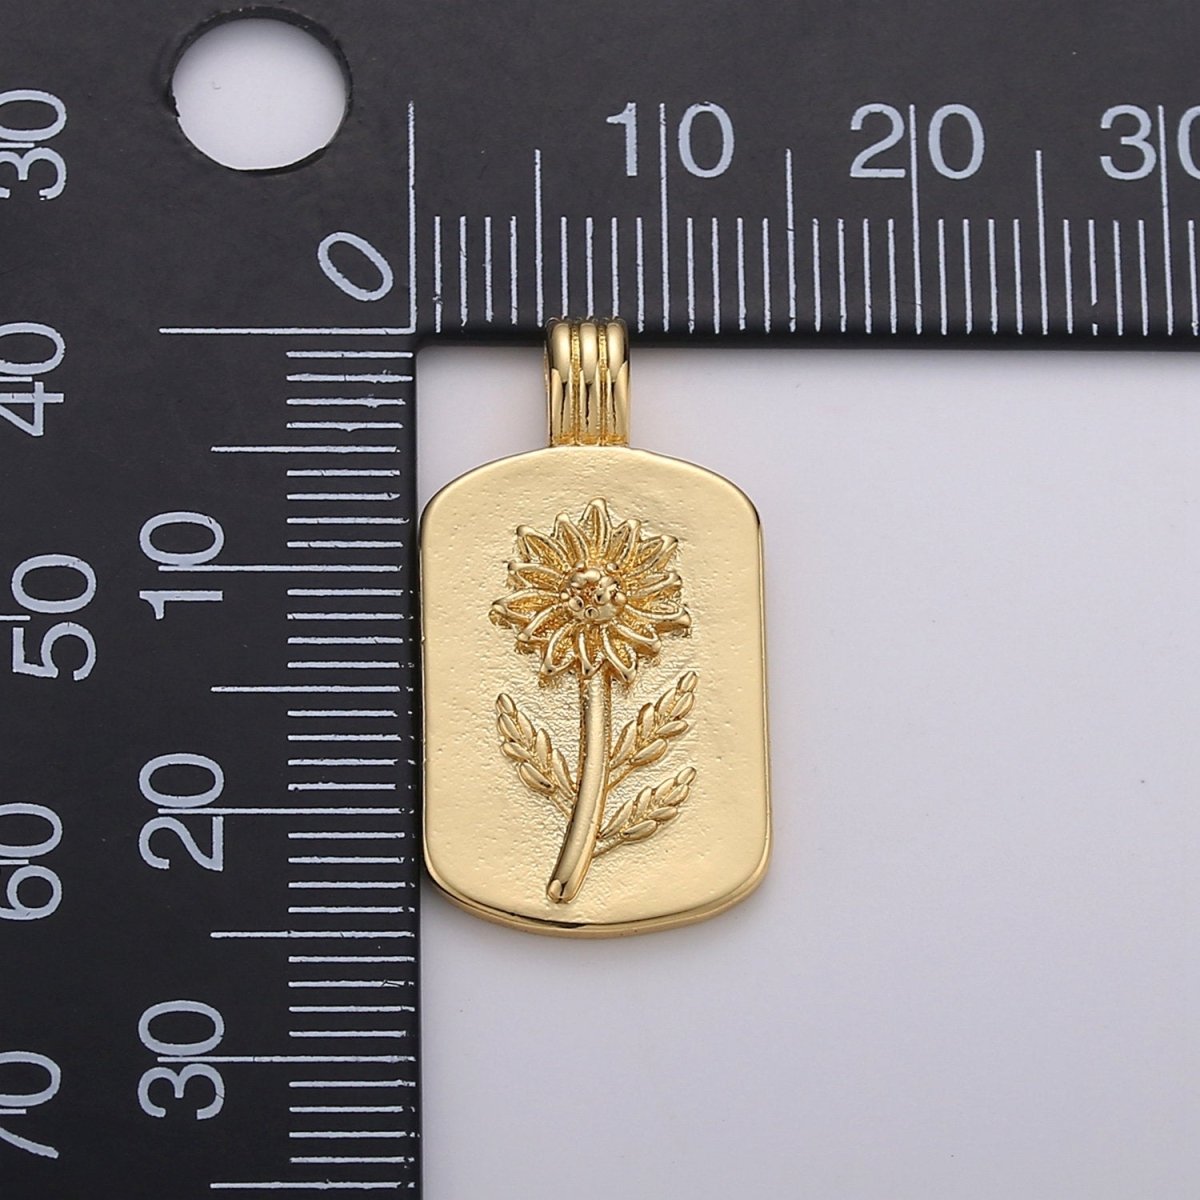 Sun Flower Charms, Gold SunFlower Pendant, Dainty Flower Charm, Small Medallion Charm for Necklace Floral Flower Jewelry I-739 - DLUXCA